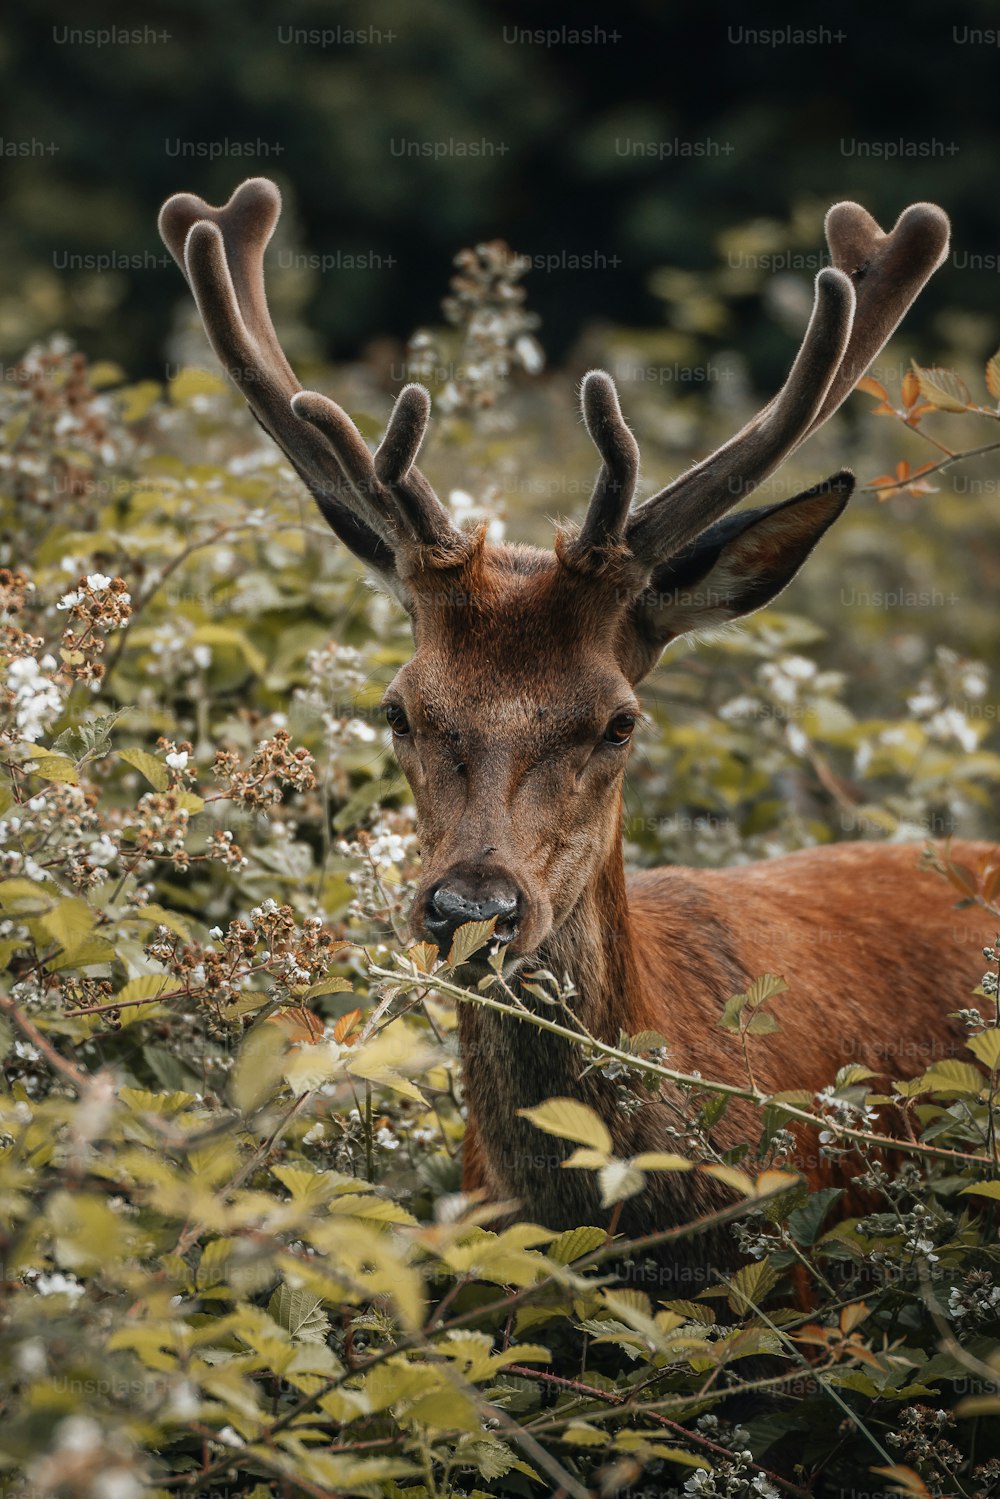 a close up of a deer in a field of flowers